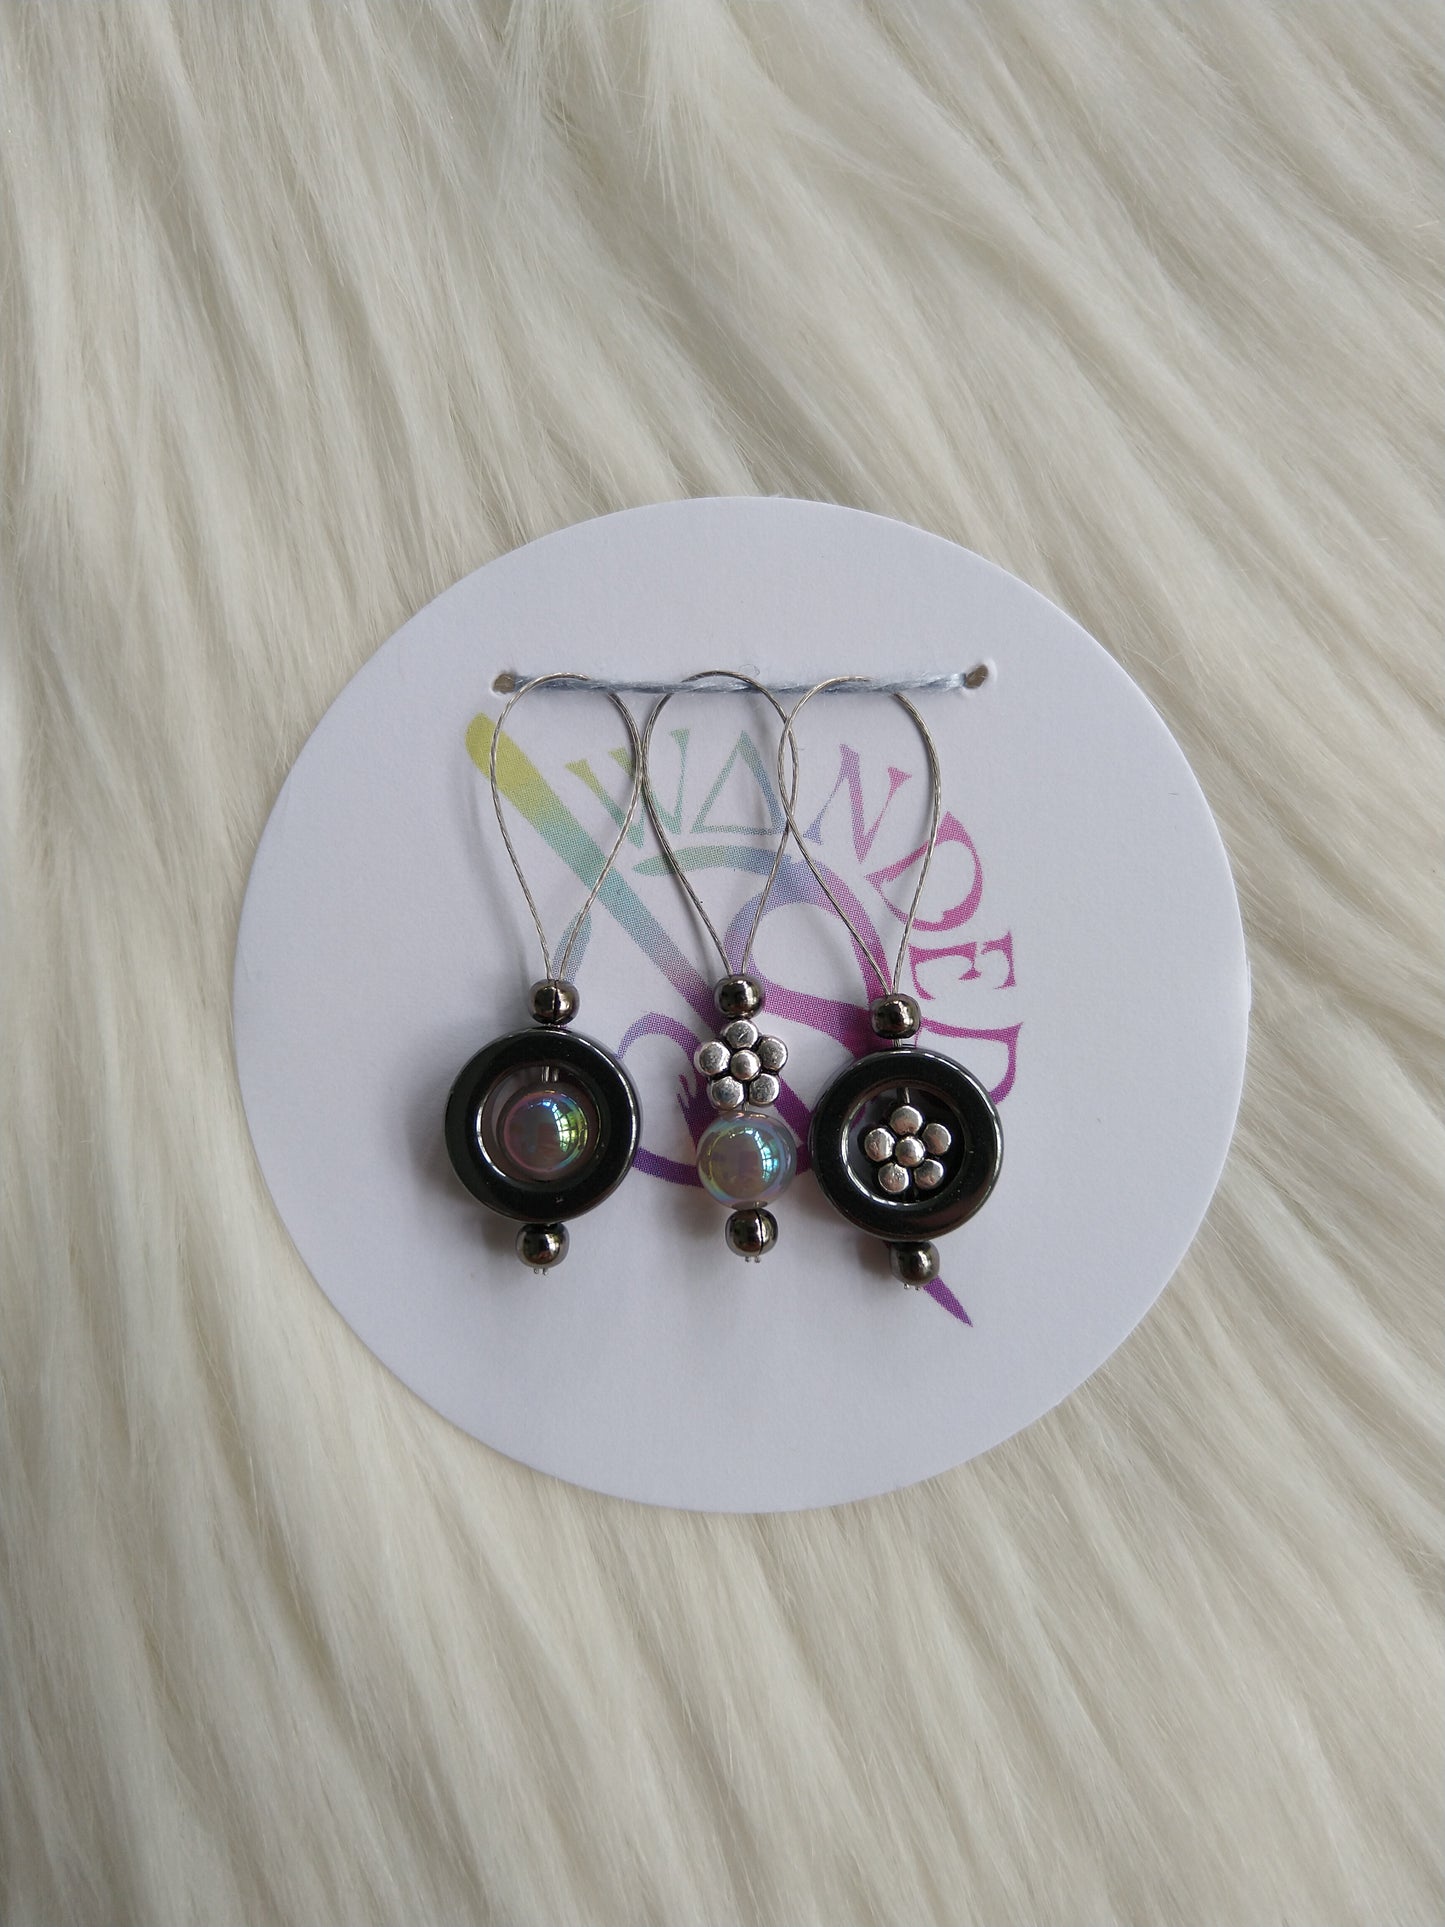 Stitch Markers - shimmery and floral beads, set of 3